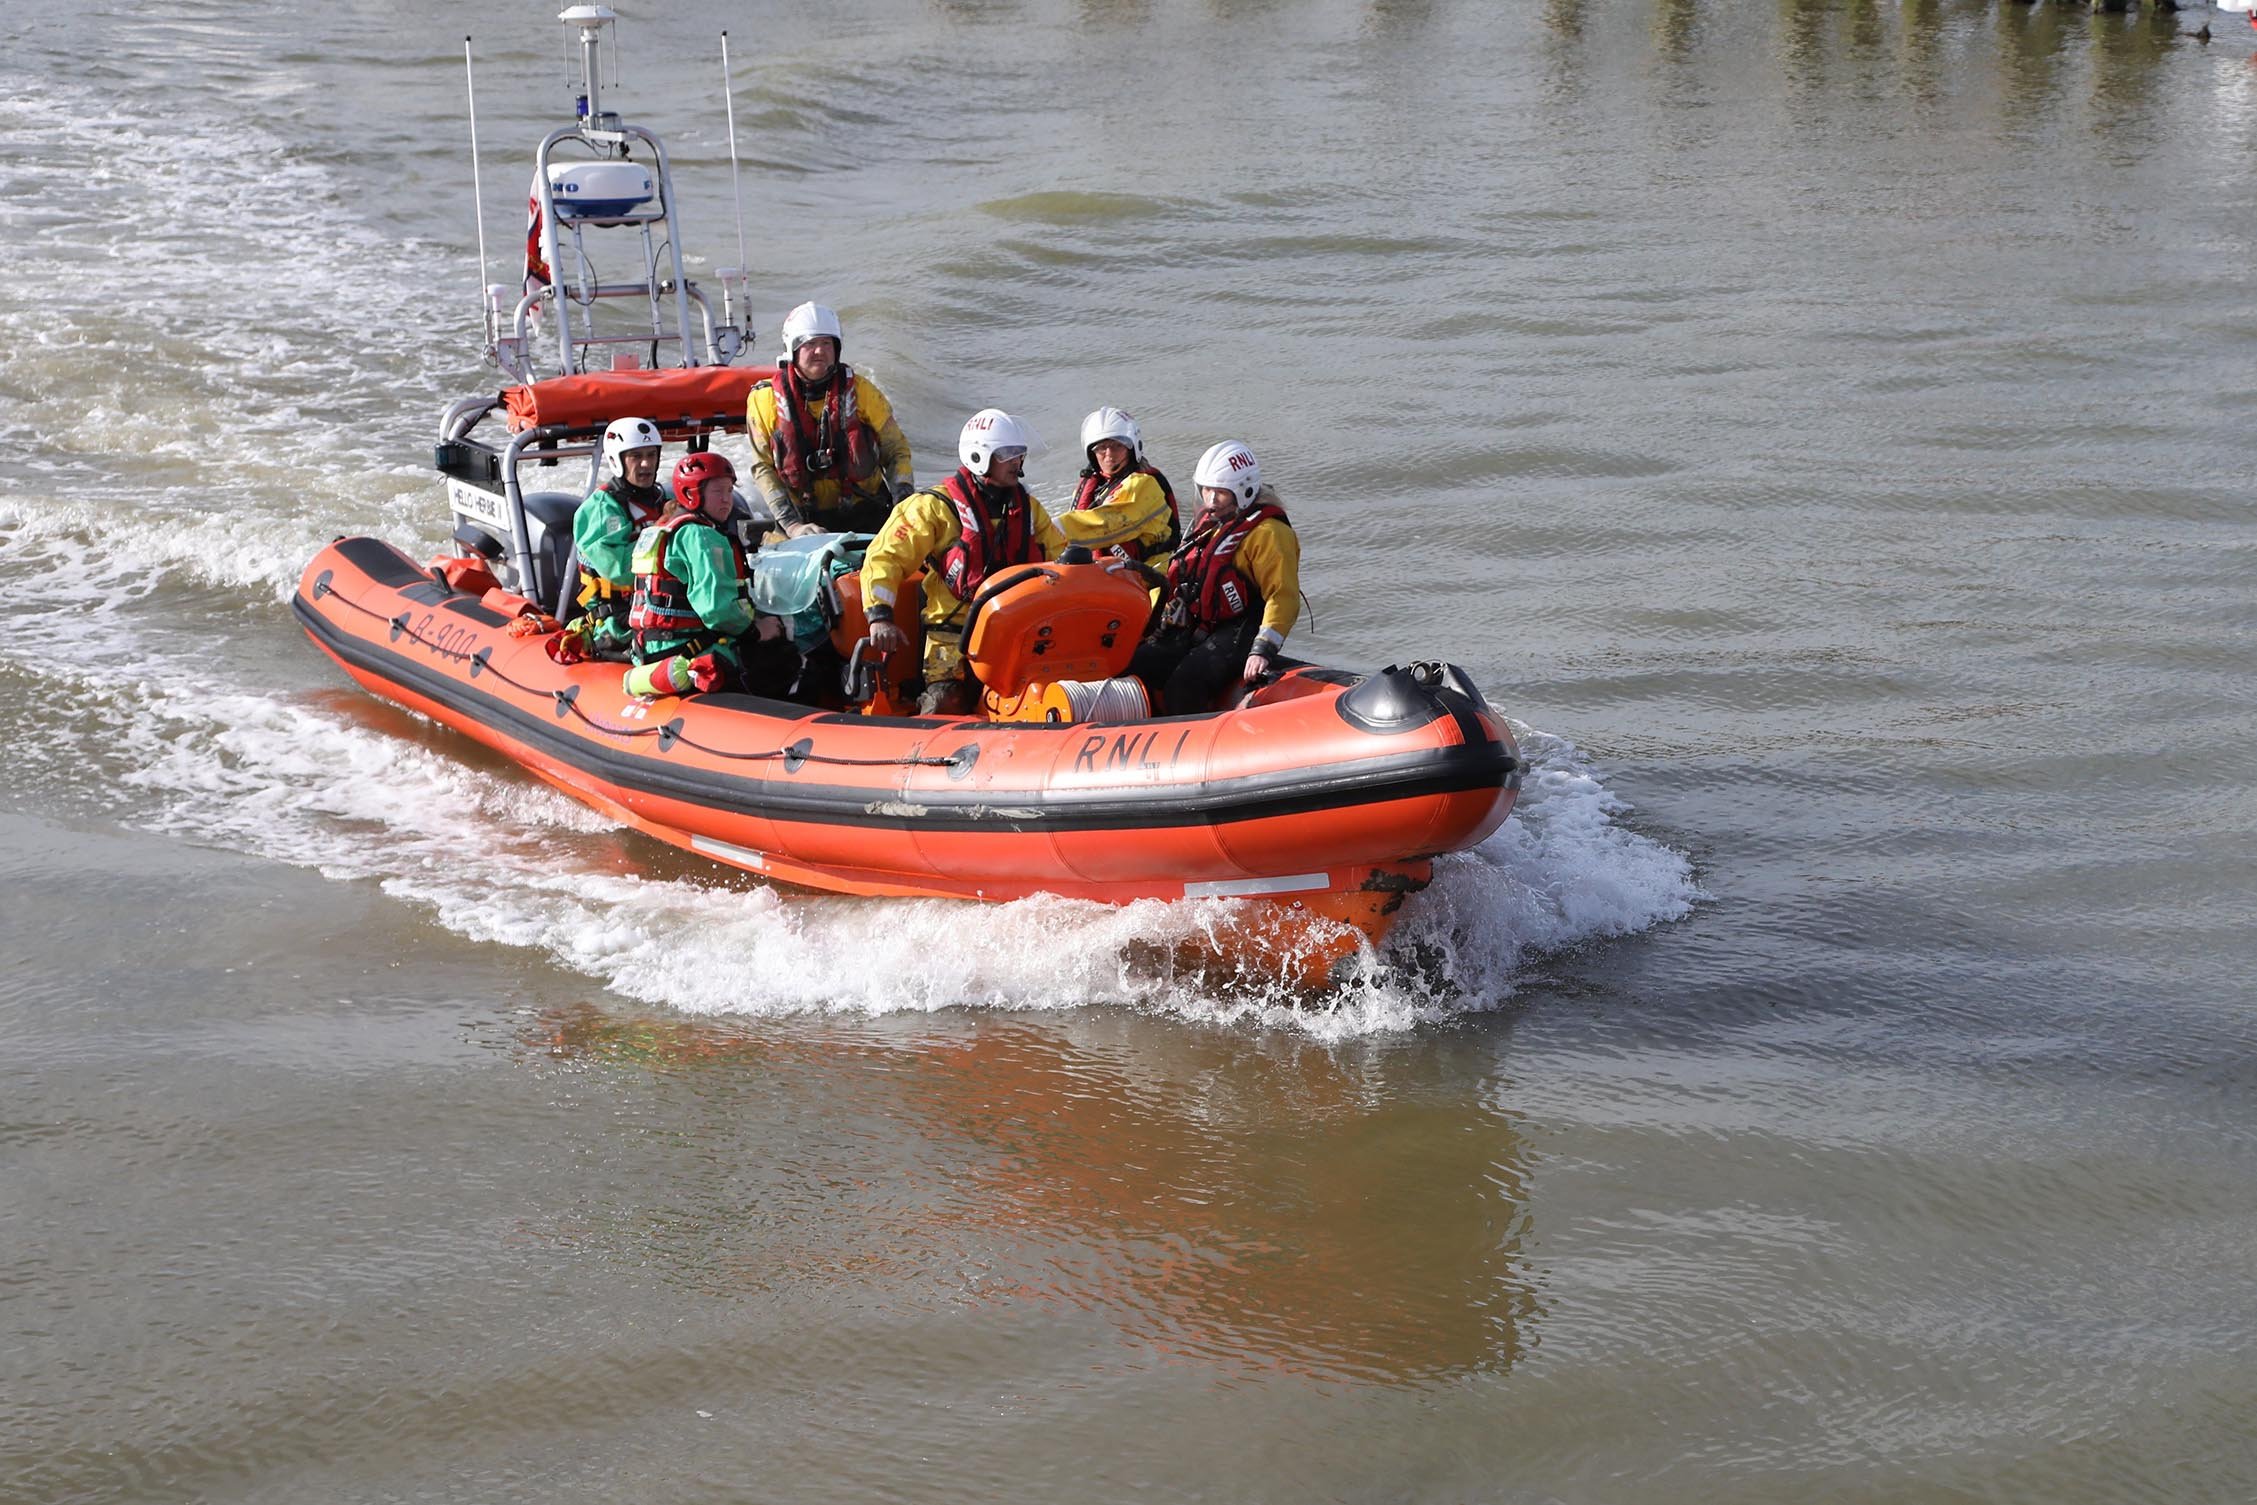 The charity dedicated to saving lives at sea, with boats crewed by dedicated volunteers and supported solely by public donations